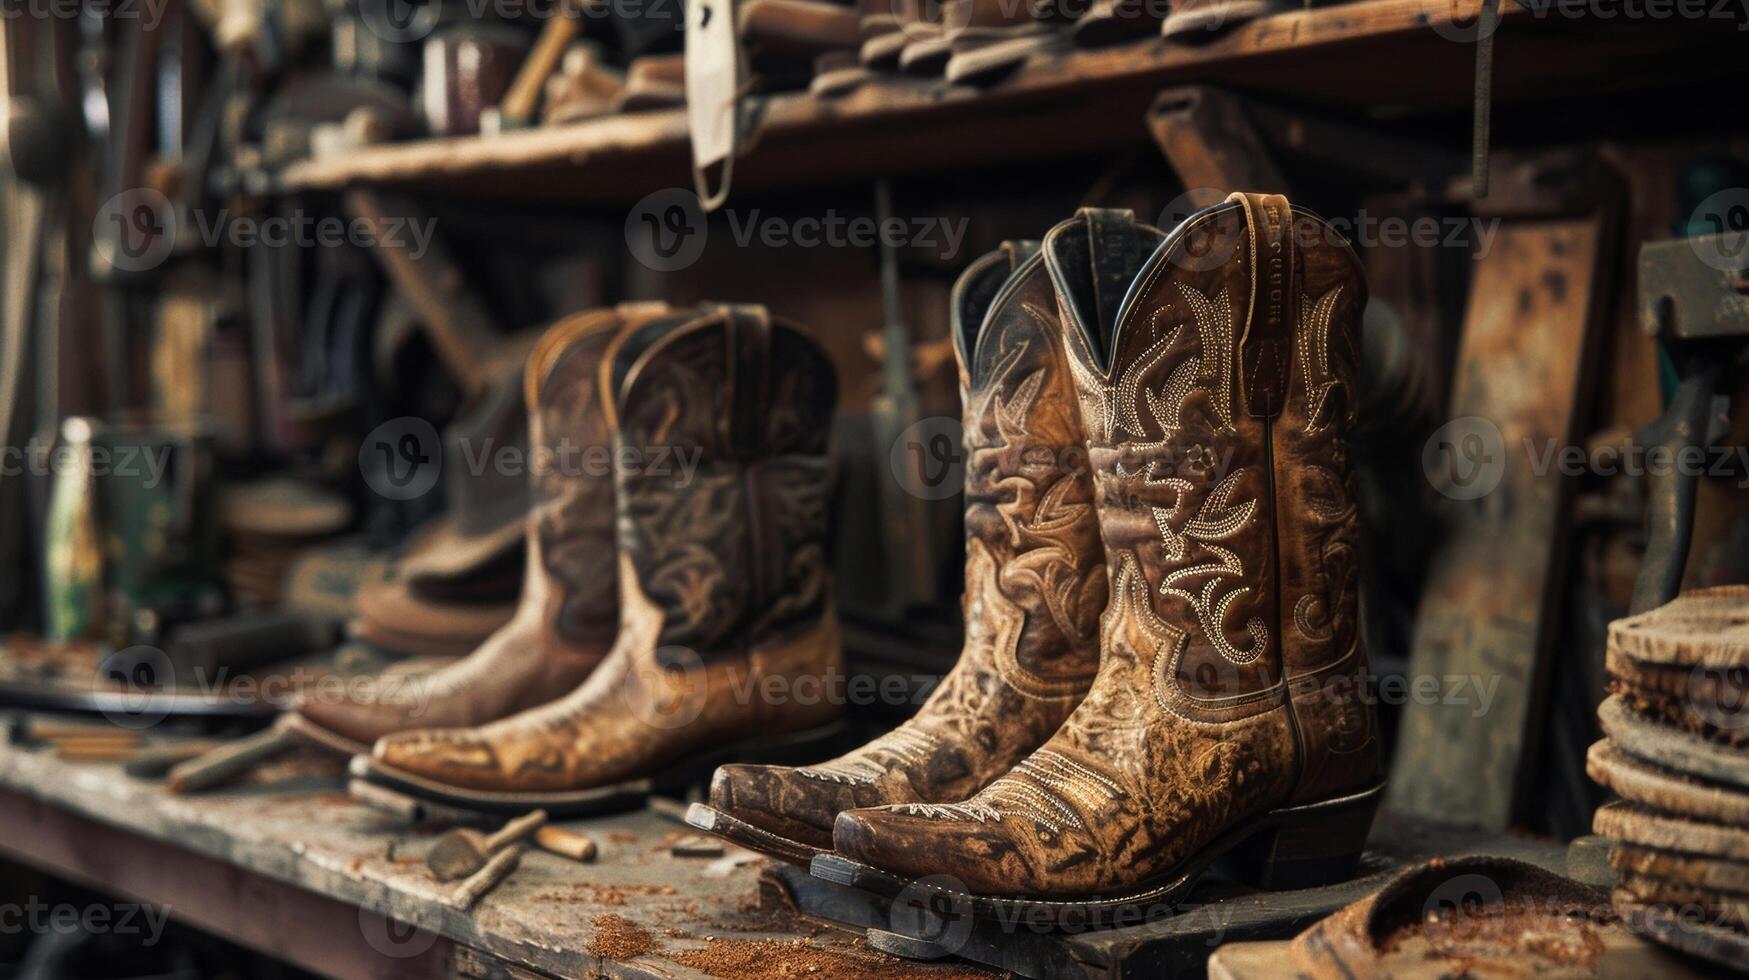 A shelves of wellworn leather tools a craftsman toils away at his latest creation a pair of custom cowboy boots destined to become a cherished heirloom photo